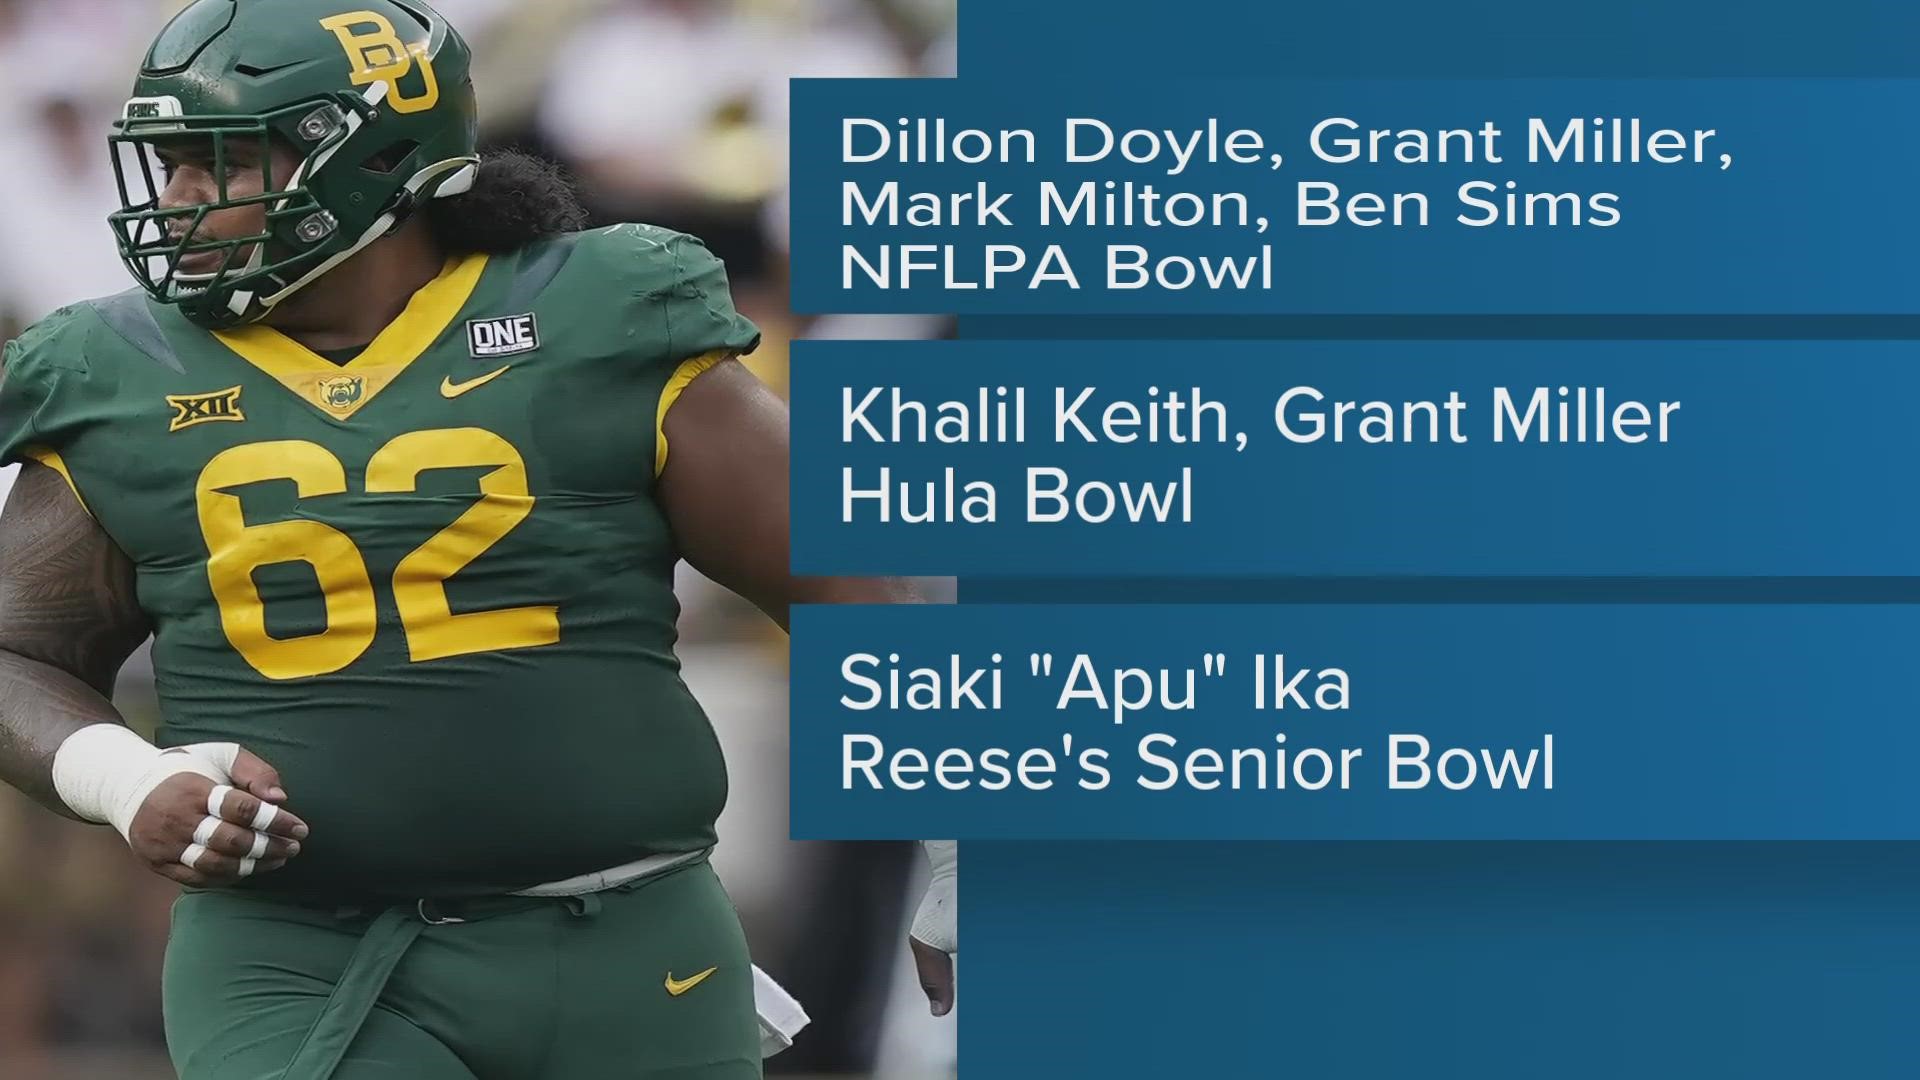 Players will be participating in the NFLPA, Hula and Reese's Senior Bowl.